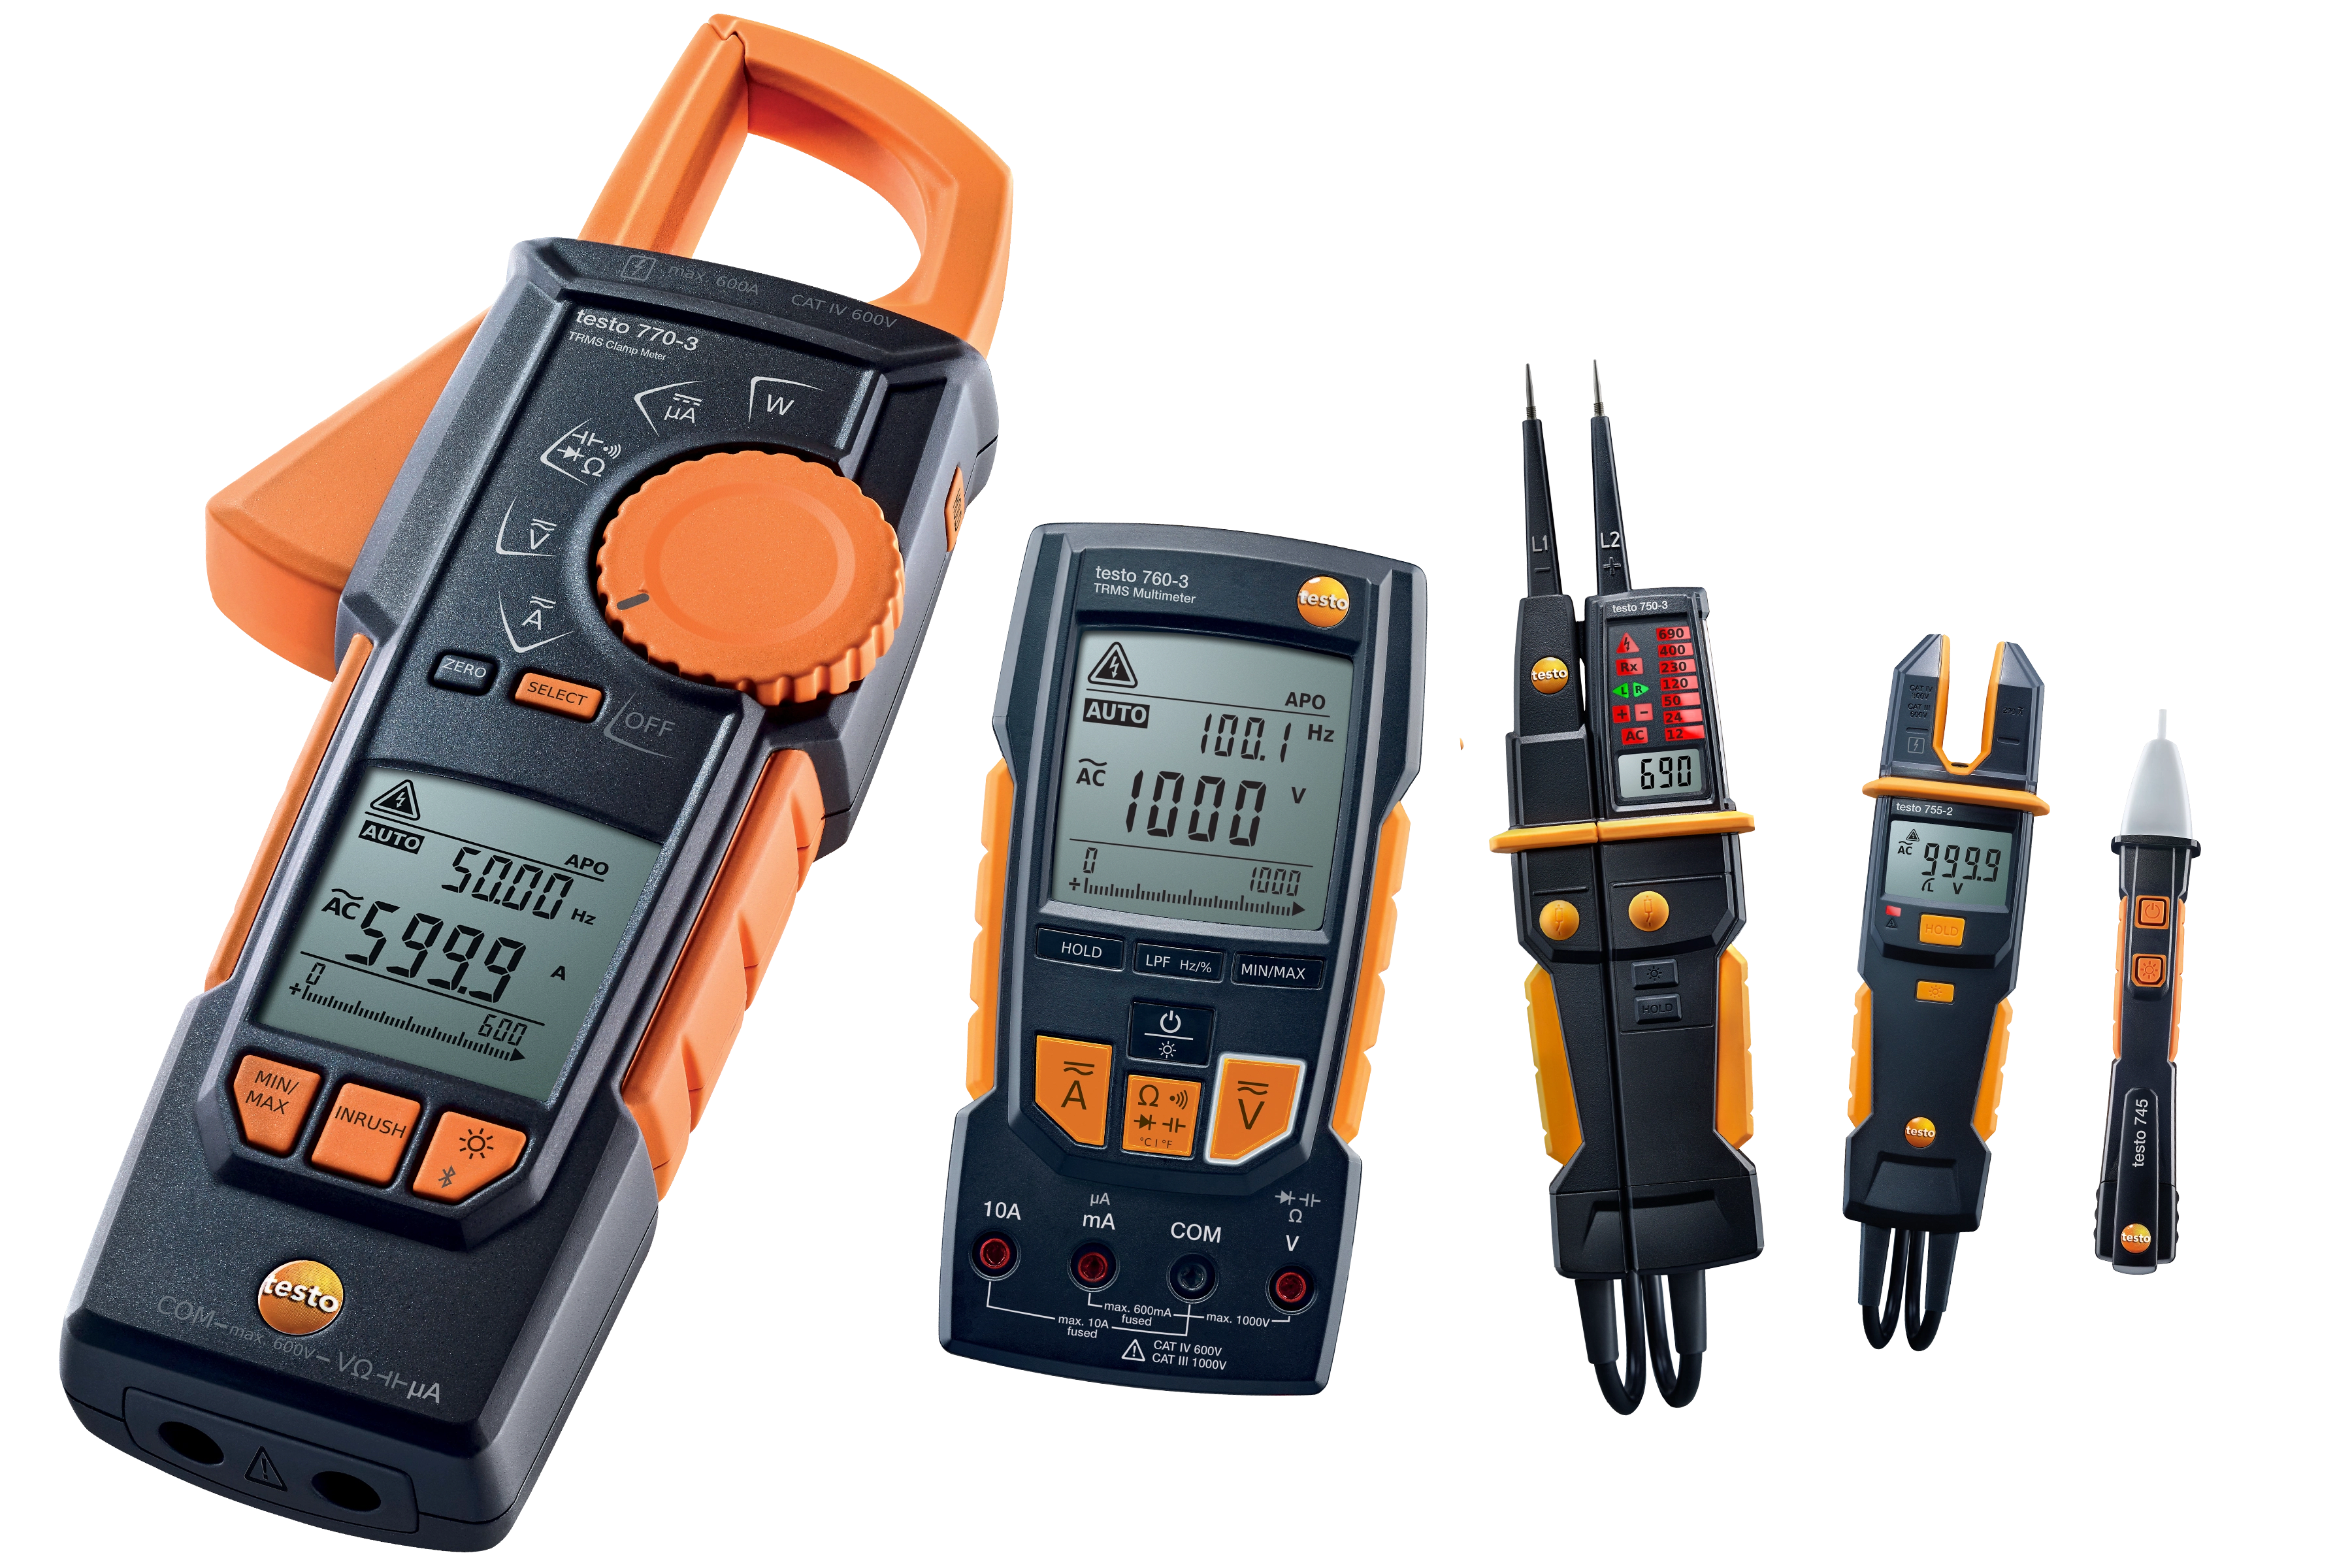 Testo's electrical measuring instruments